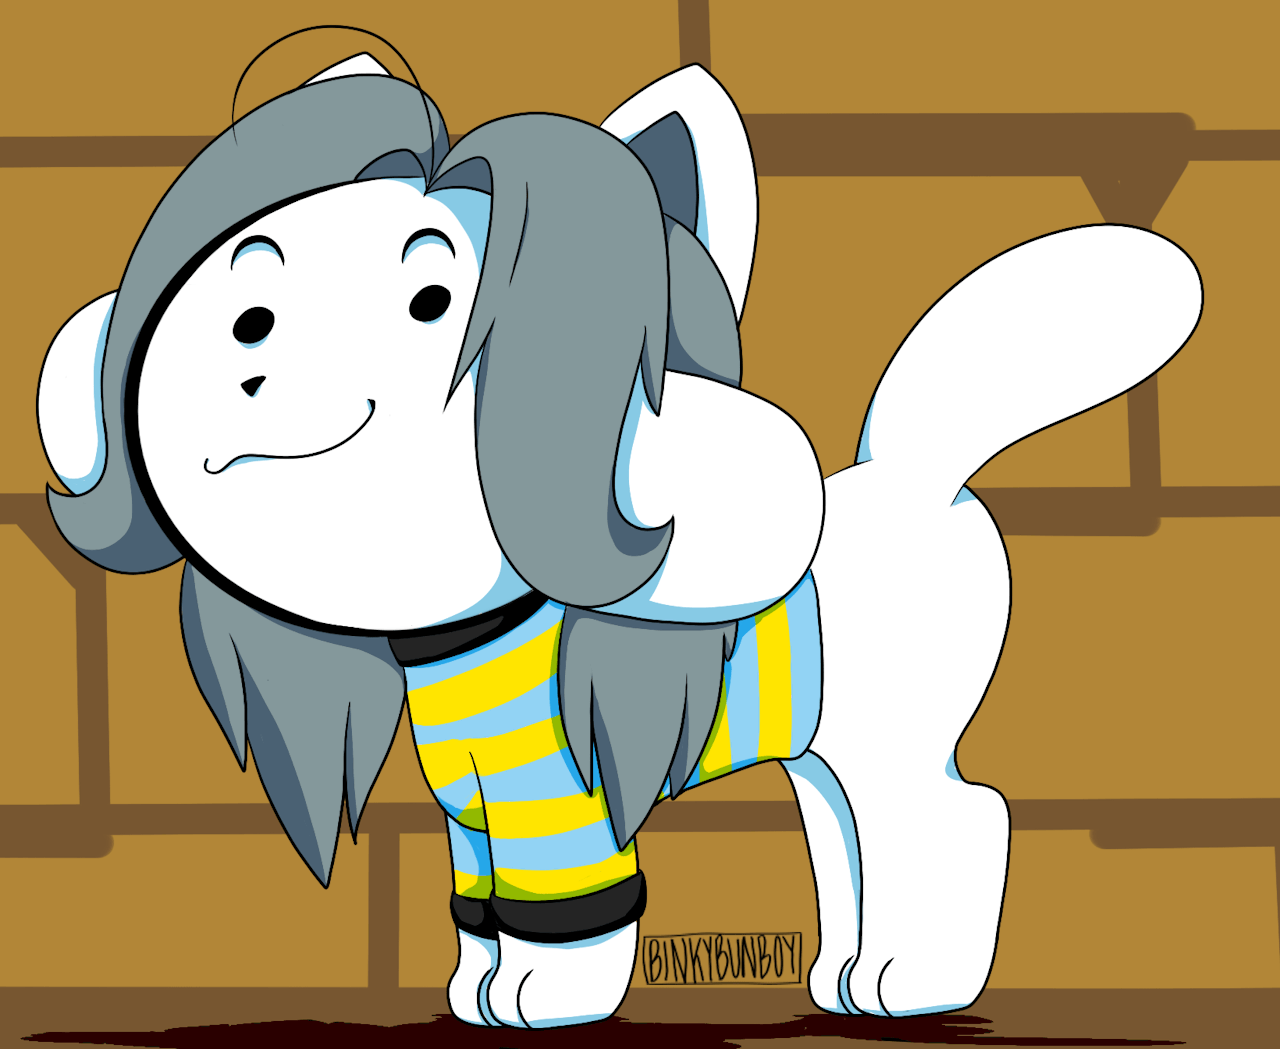 Vote for who you think is the cutest out of Temmie, Lesser Dog, Greater Dog...